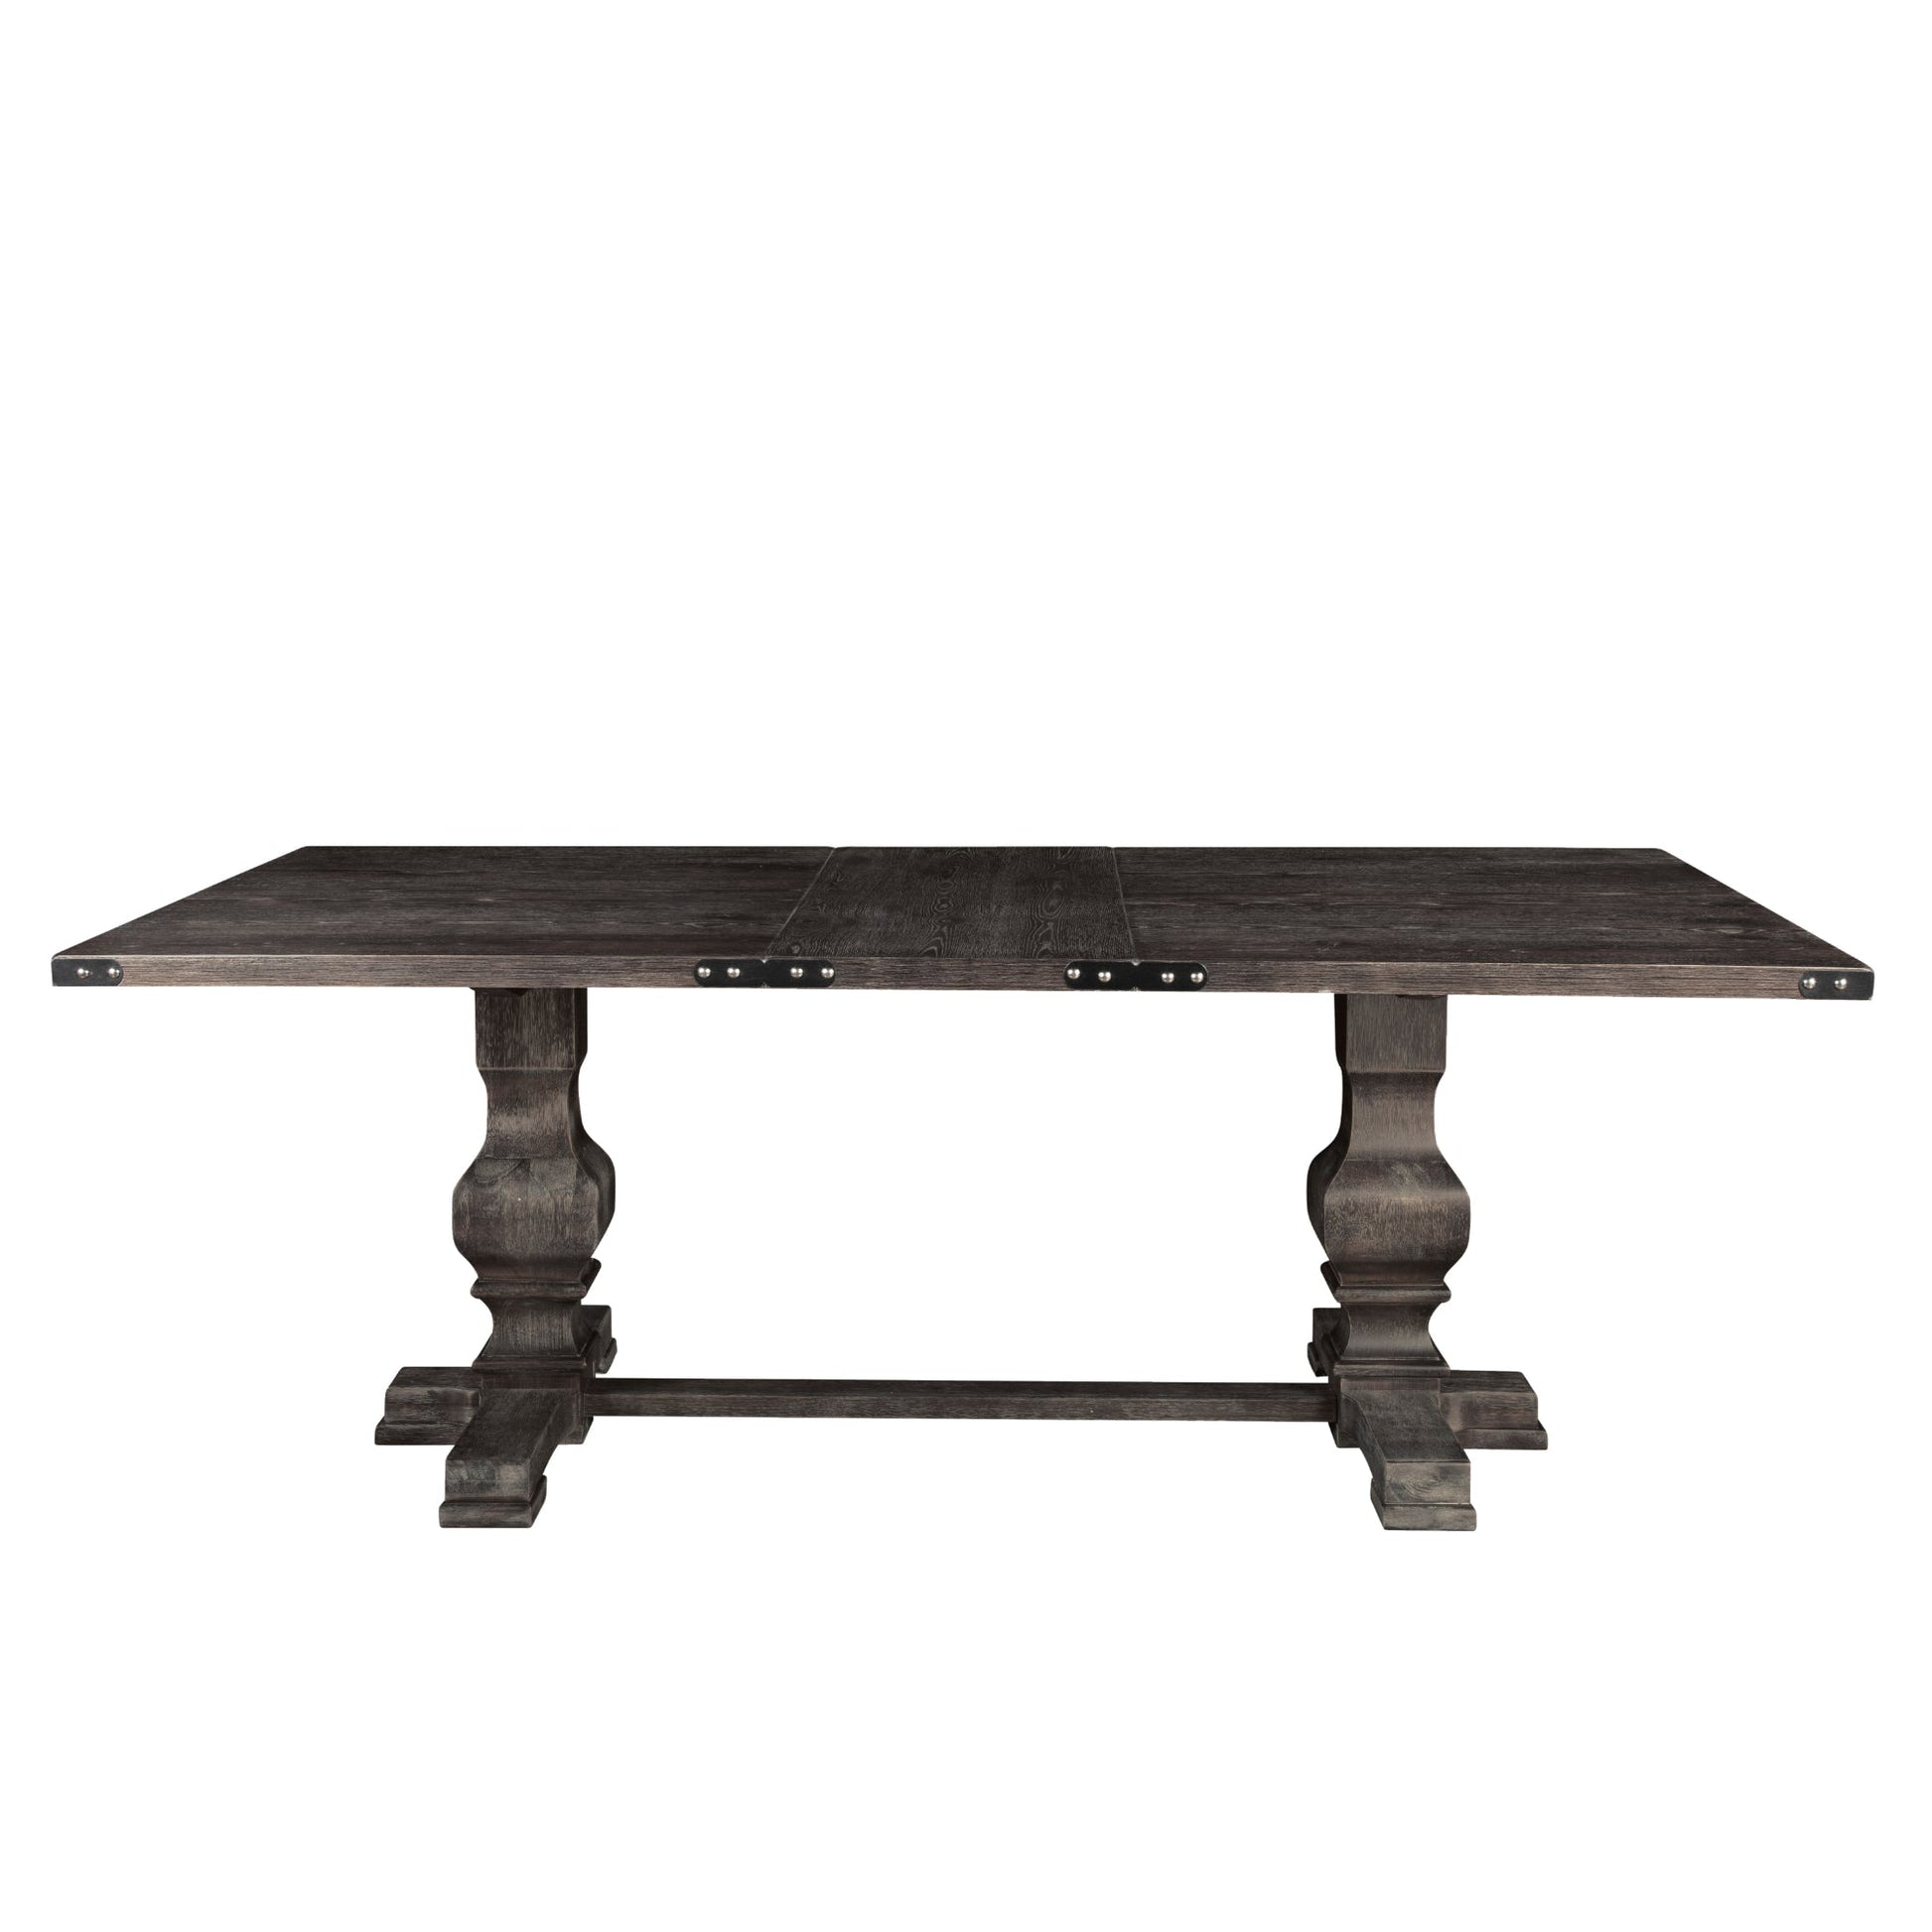 Manchester Dining Table, Charcoal - Alpine Furniture